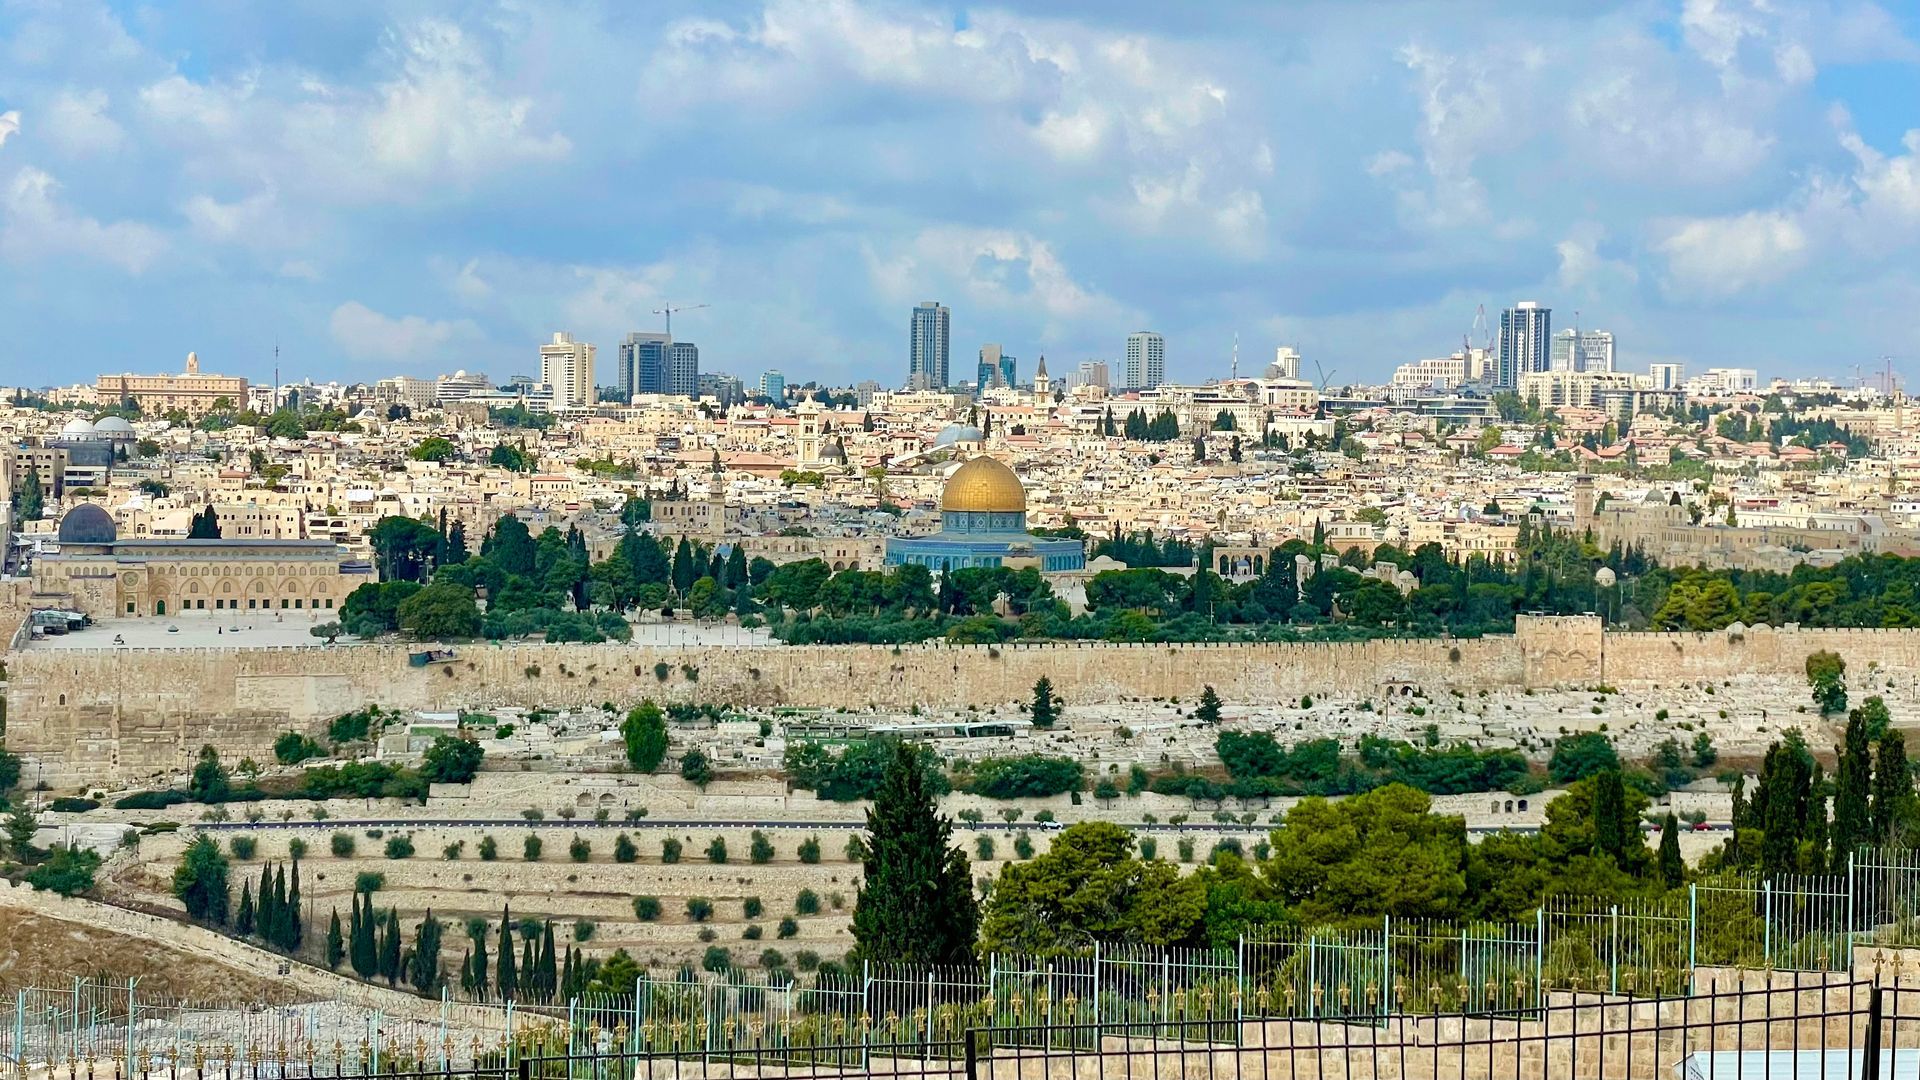 An aerial view of the city of jerusalem with the dome of the rock in the background.